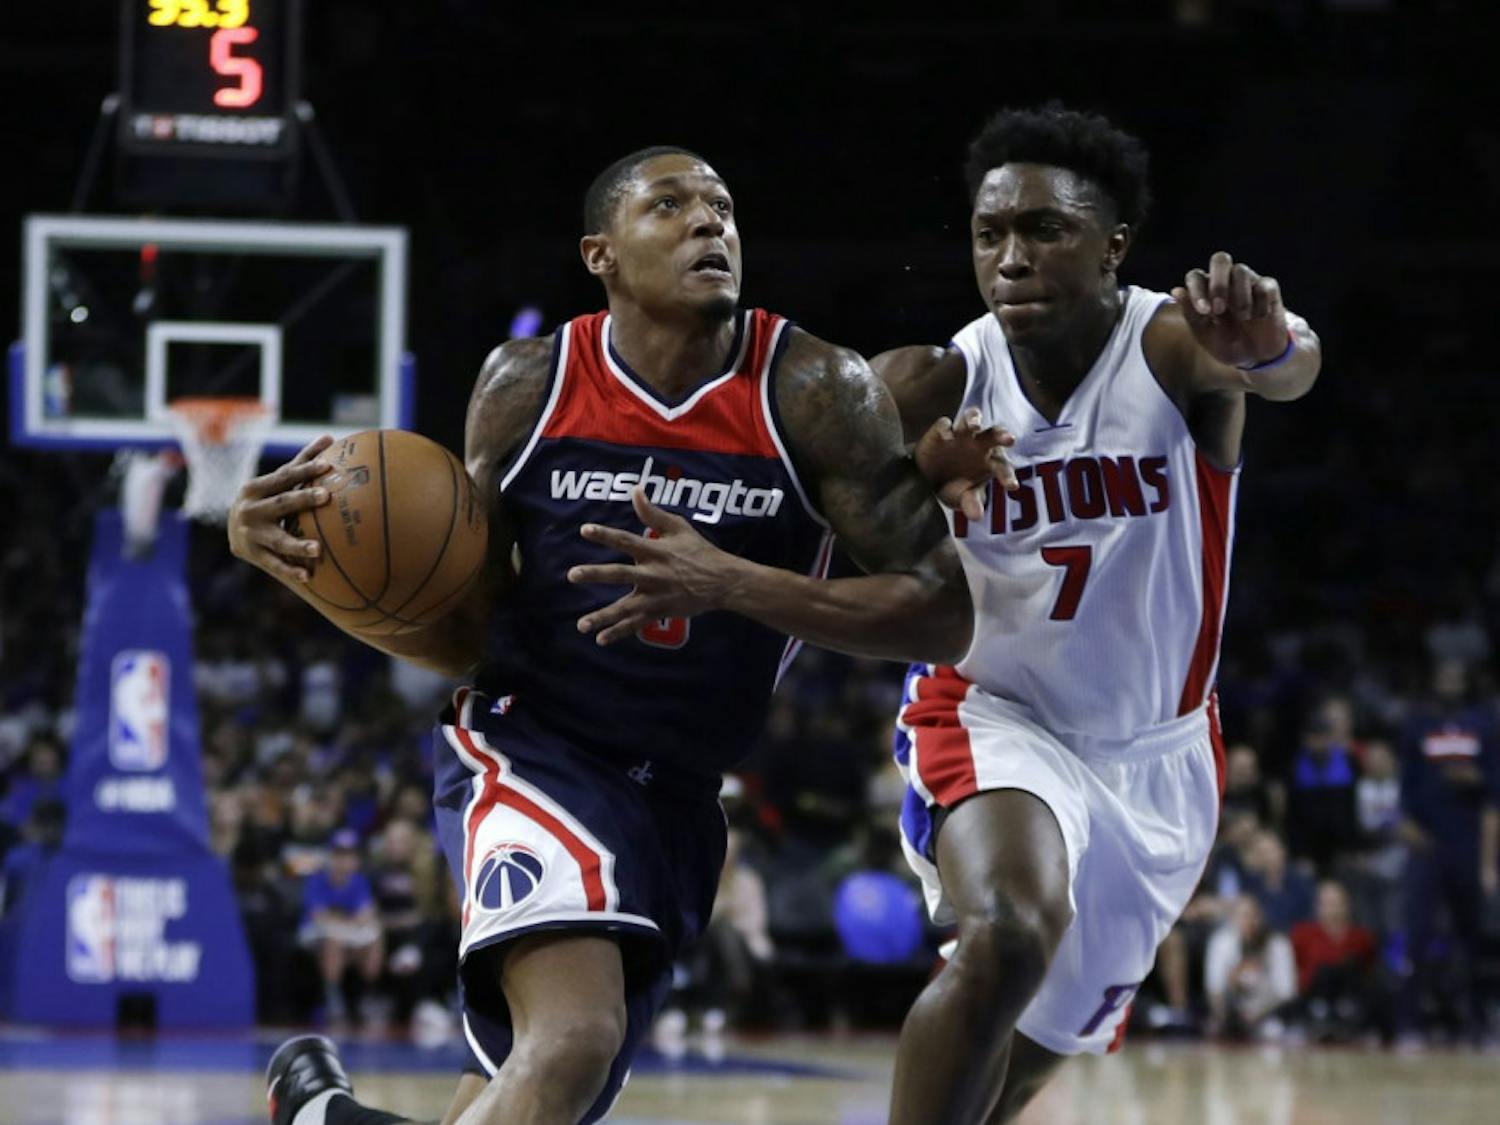 Washington Wizards guard Bradley Beal (3) drives on Detroit Pistons forward Stanley Johnson (7) during second half of an NBA basketball game, Monday, April 10, 2017, in Auburn Hills, Mich. (AP Photo/Carlos Osorio)